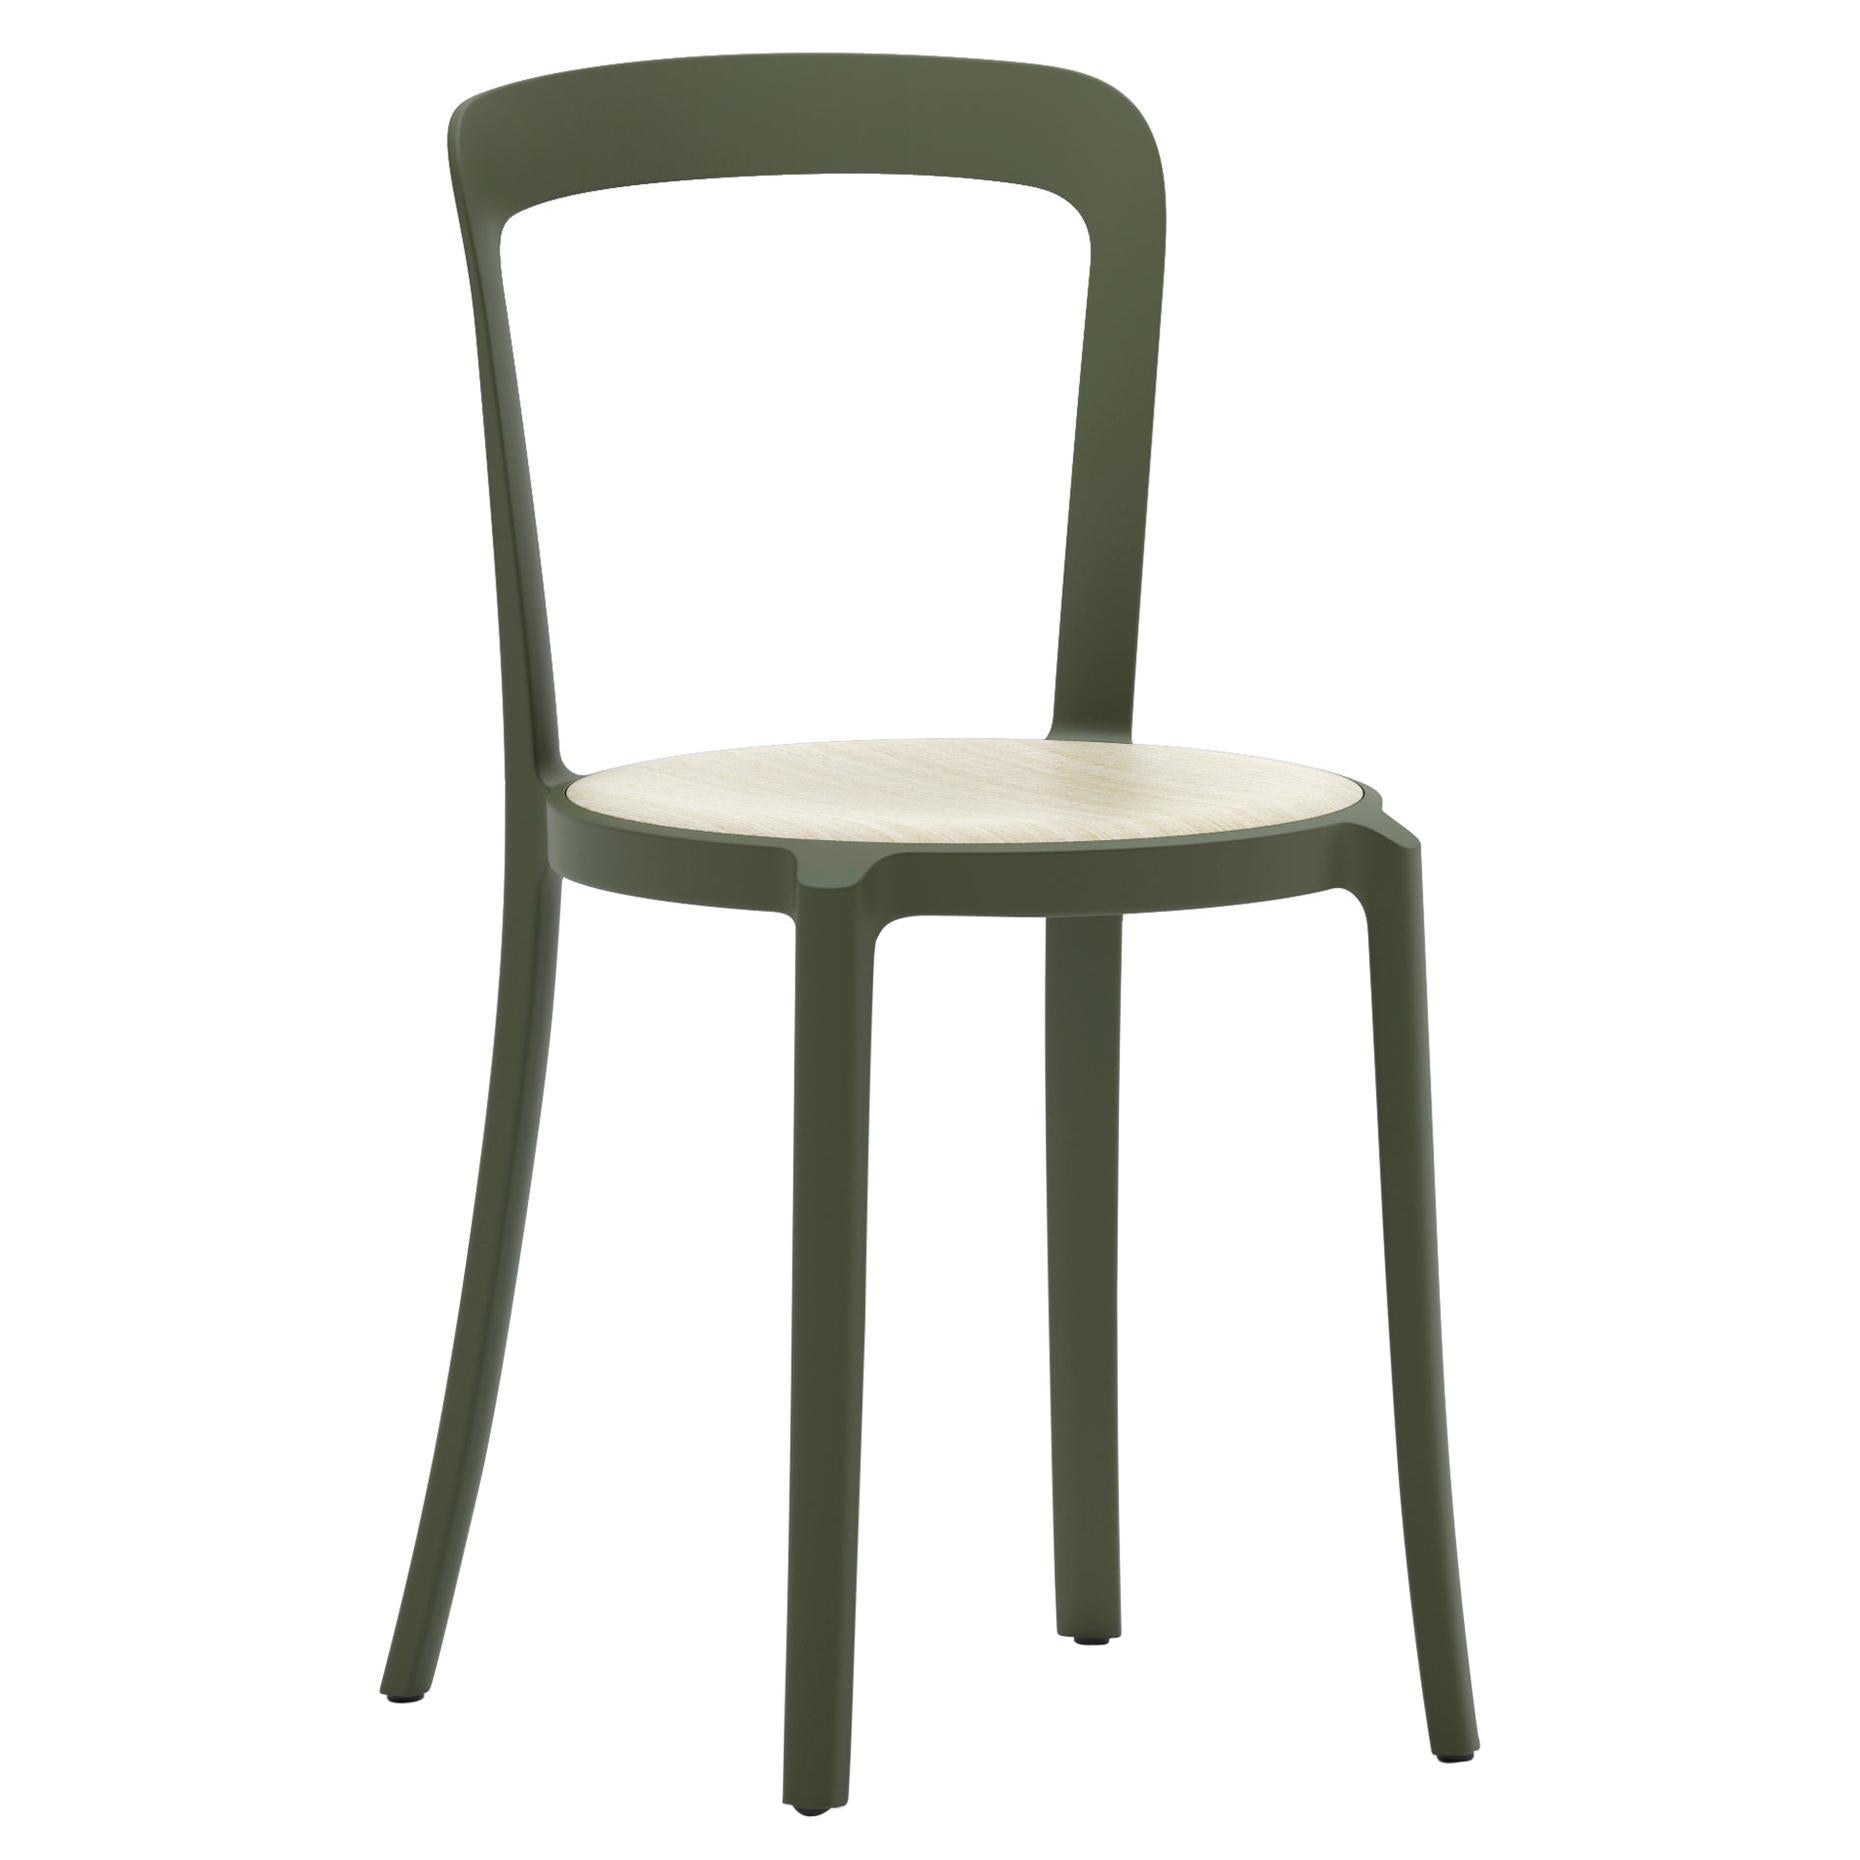 Emeco On & On Stacking Chair in Green with Ash Plywood seat by Barber & Osgerby For Sale